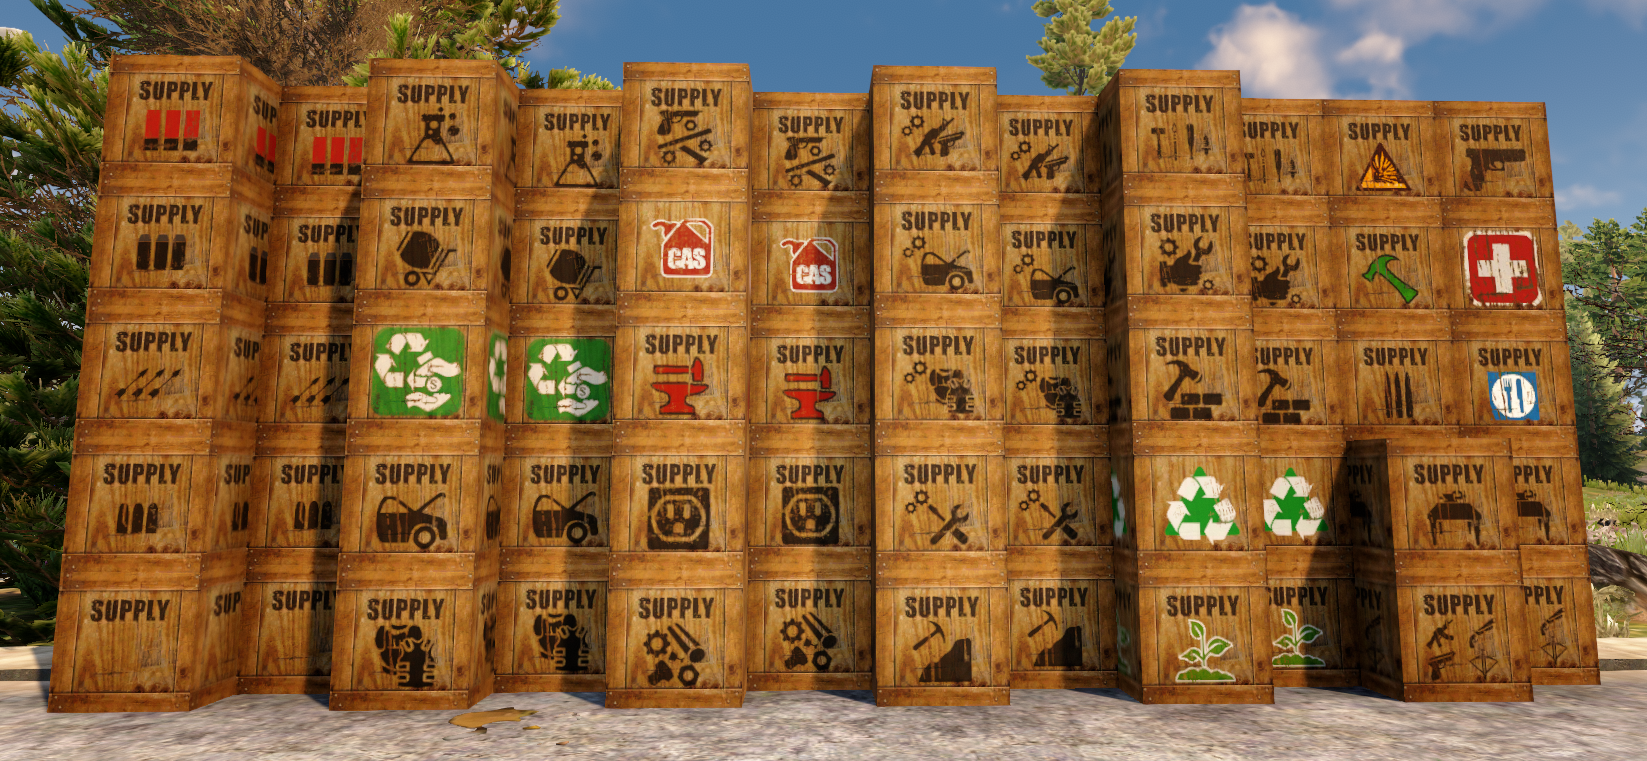 7 days to die supply crate